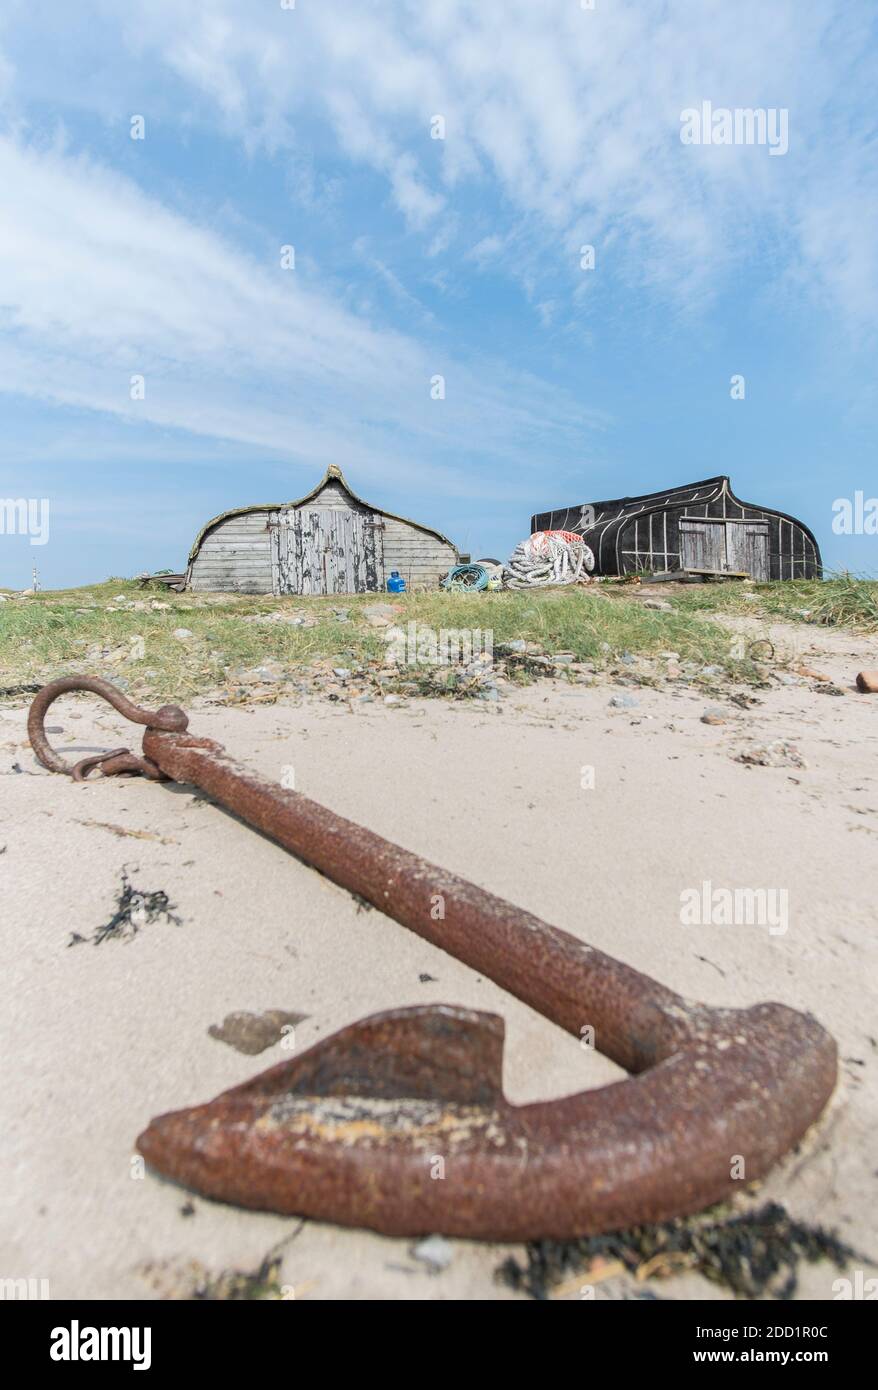 An anchor rests in the sand in front of upturned herring boats now used as fishing sheds on the Holy island of Lindisfarne, England. Stock Photo